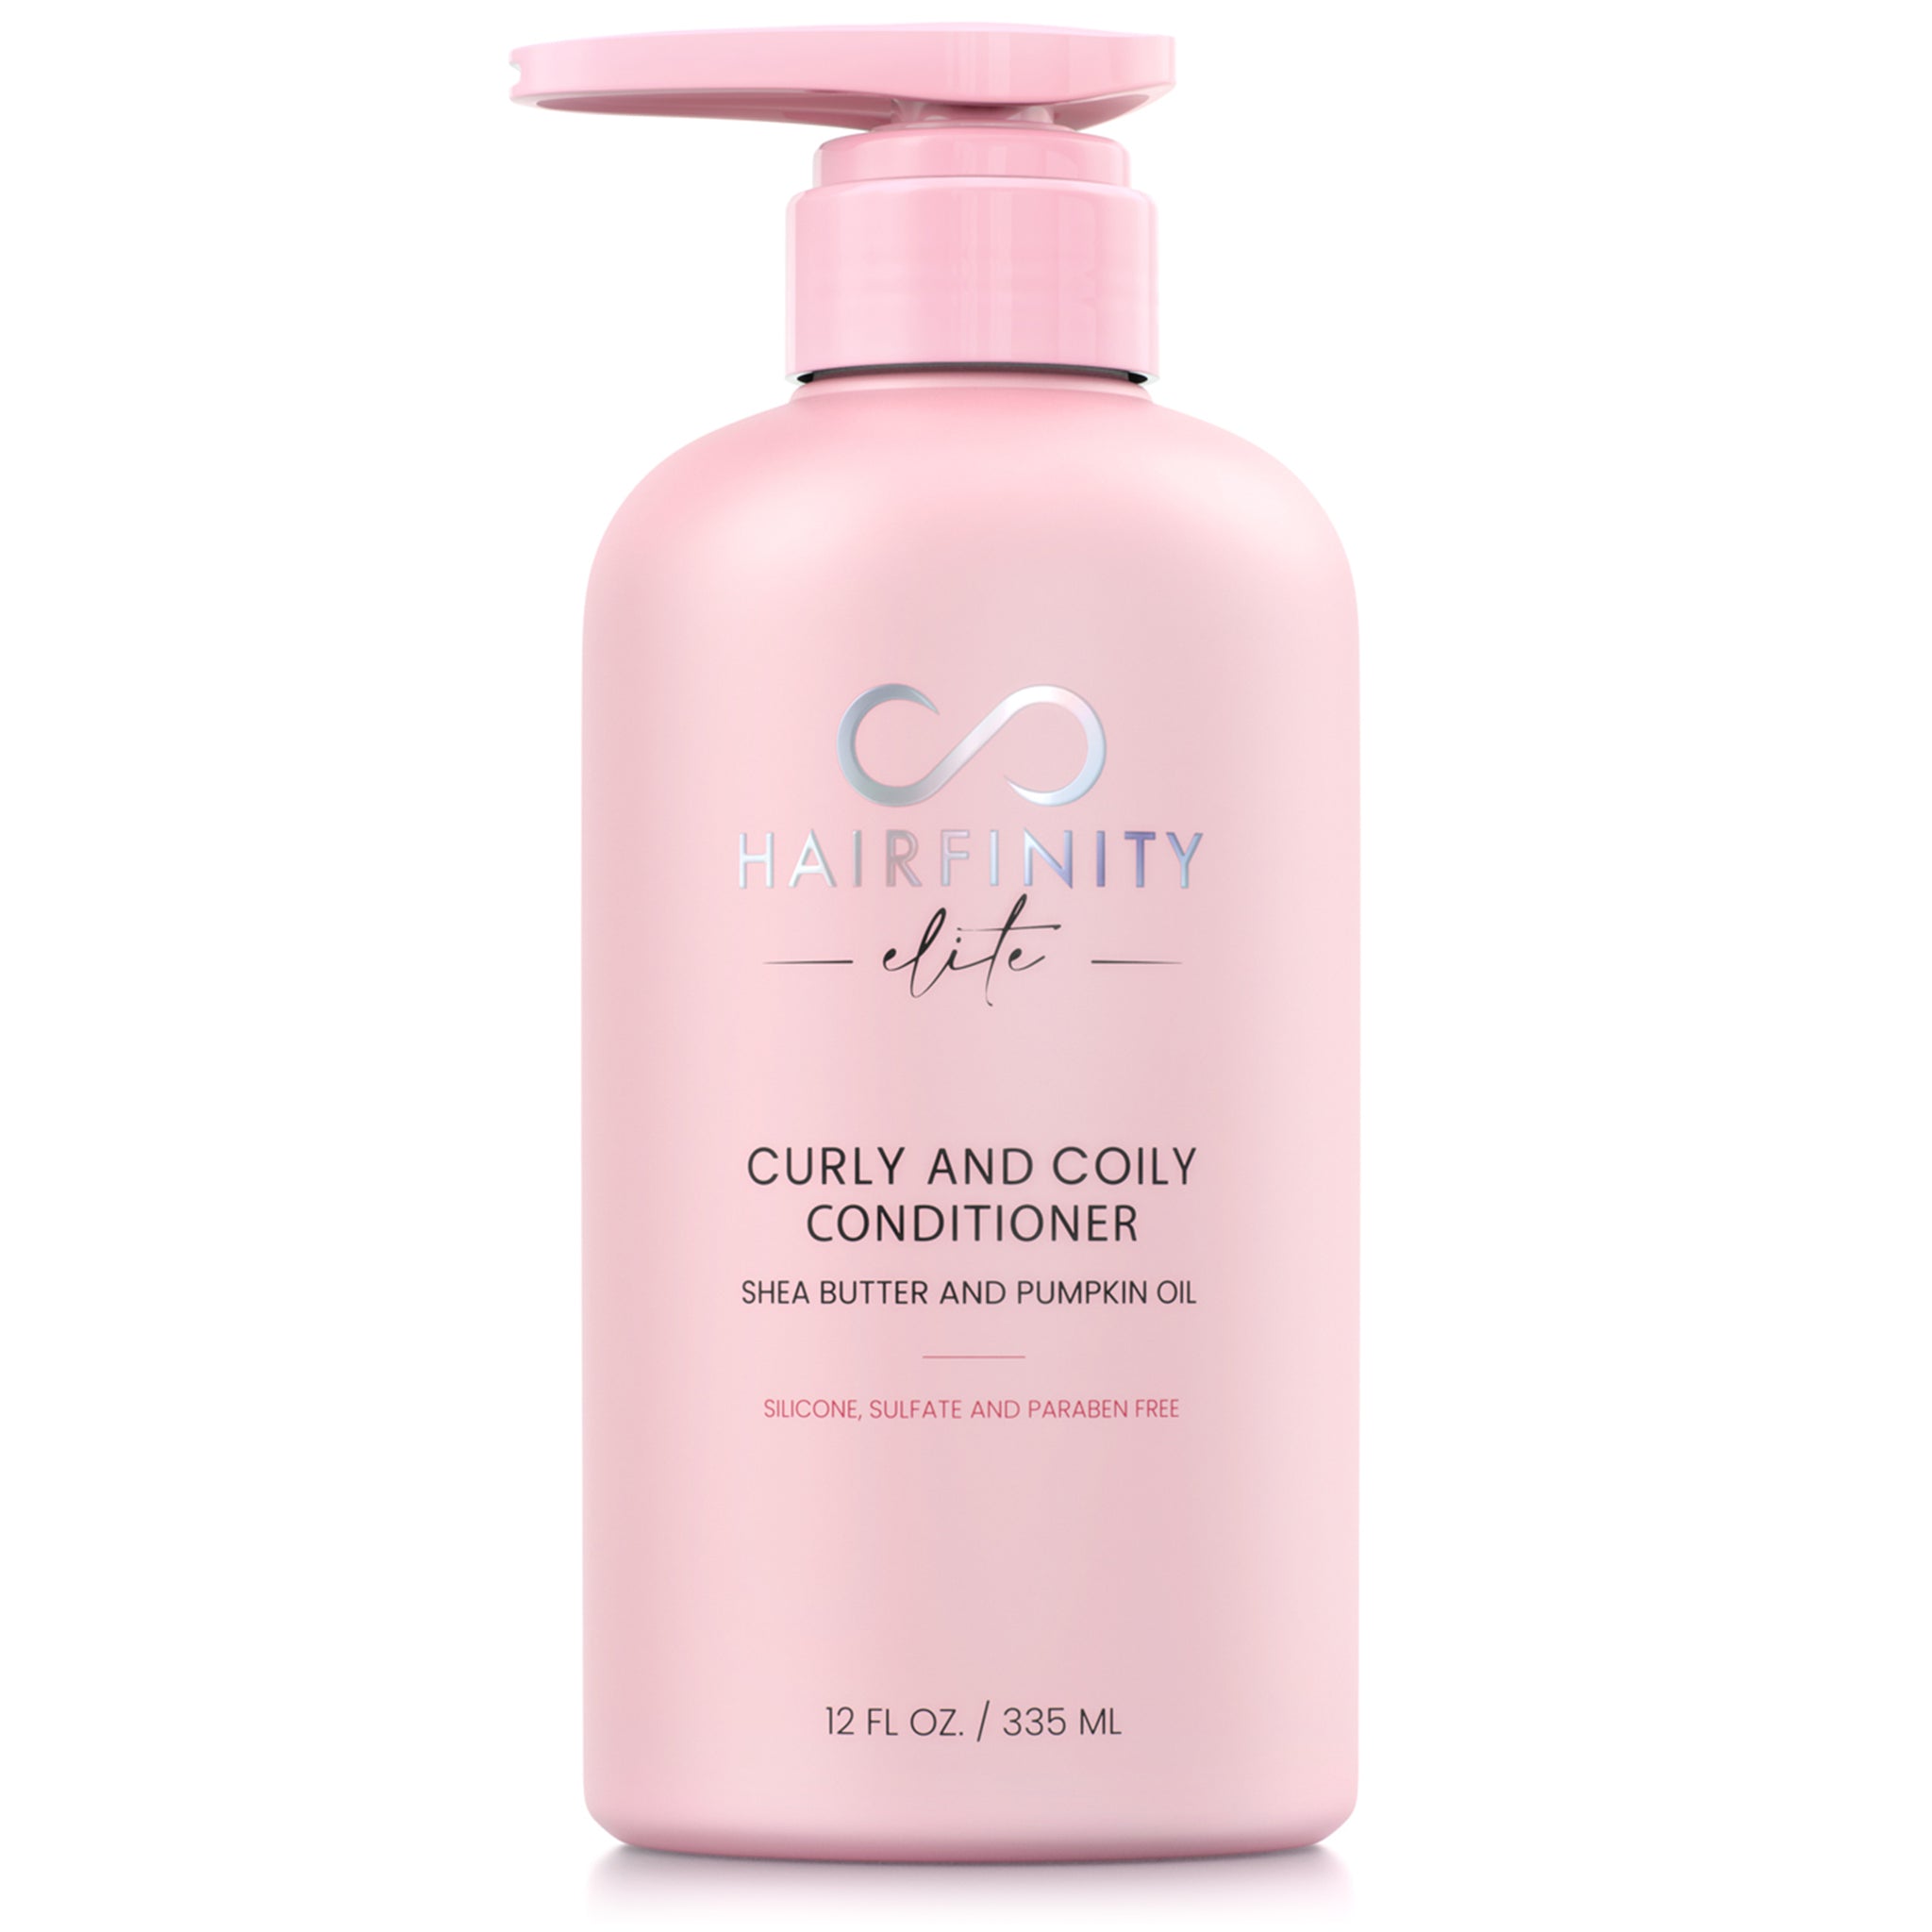 Curly and Coily Conditioner